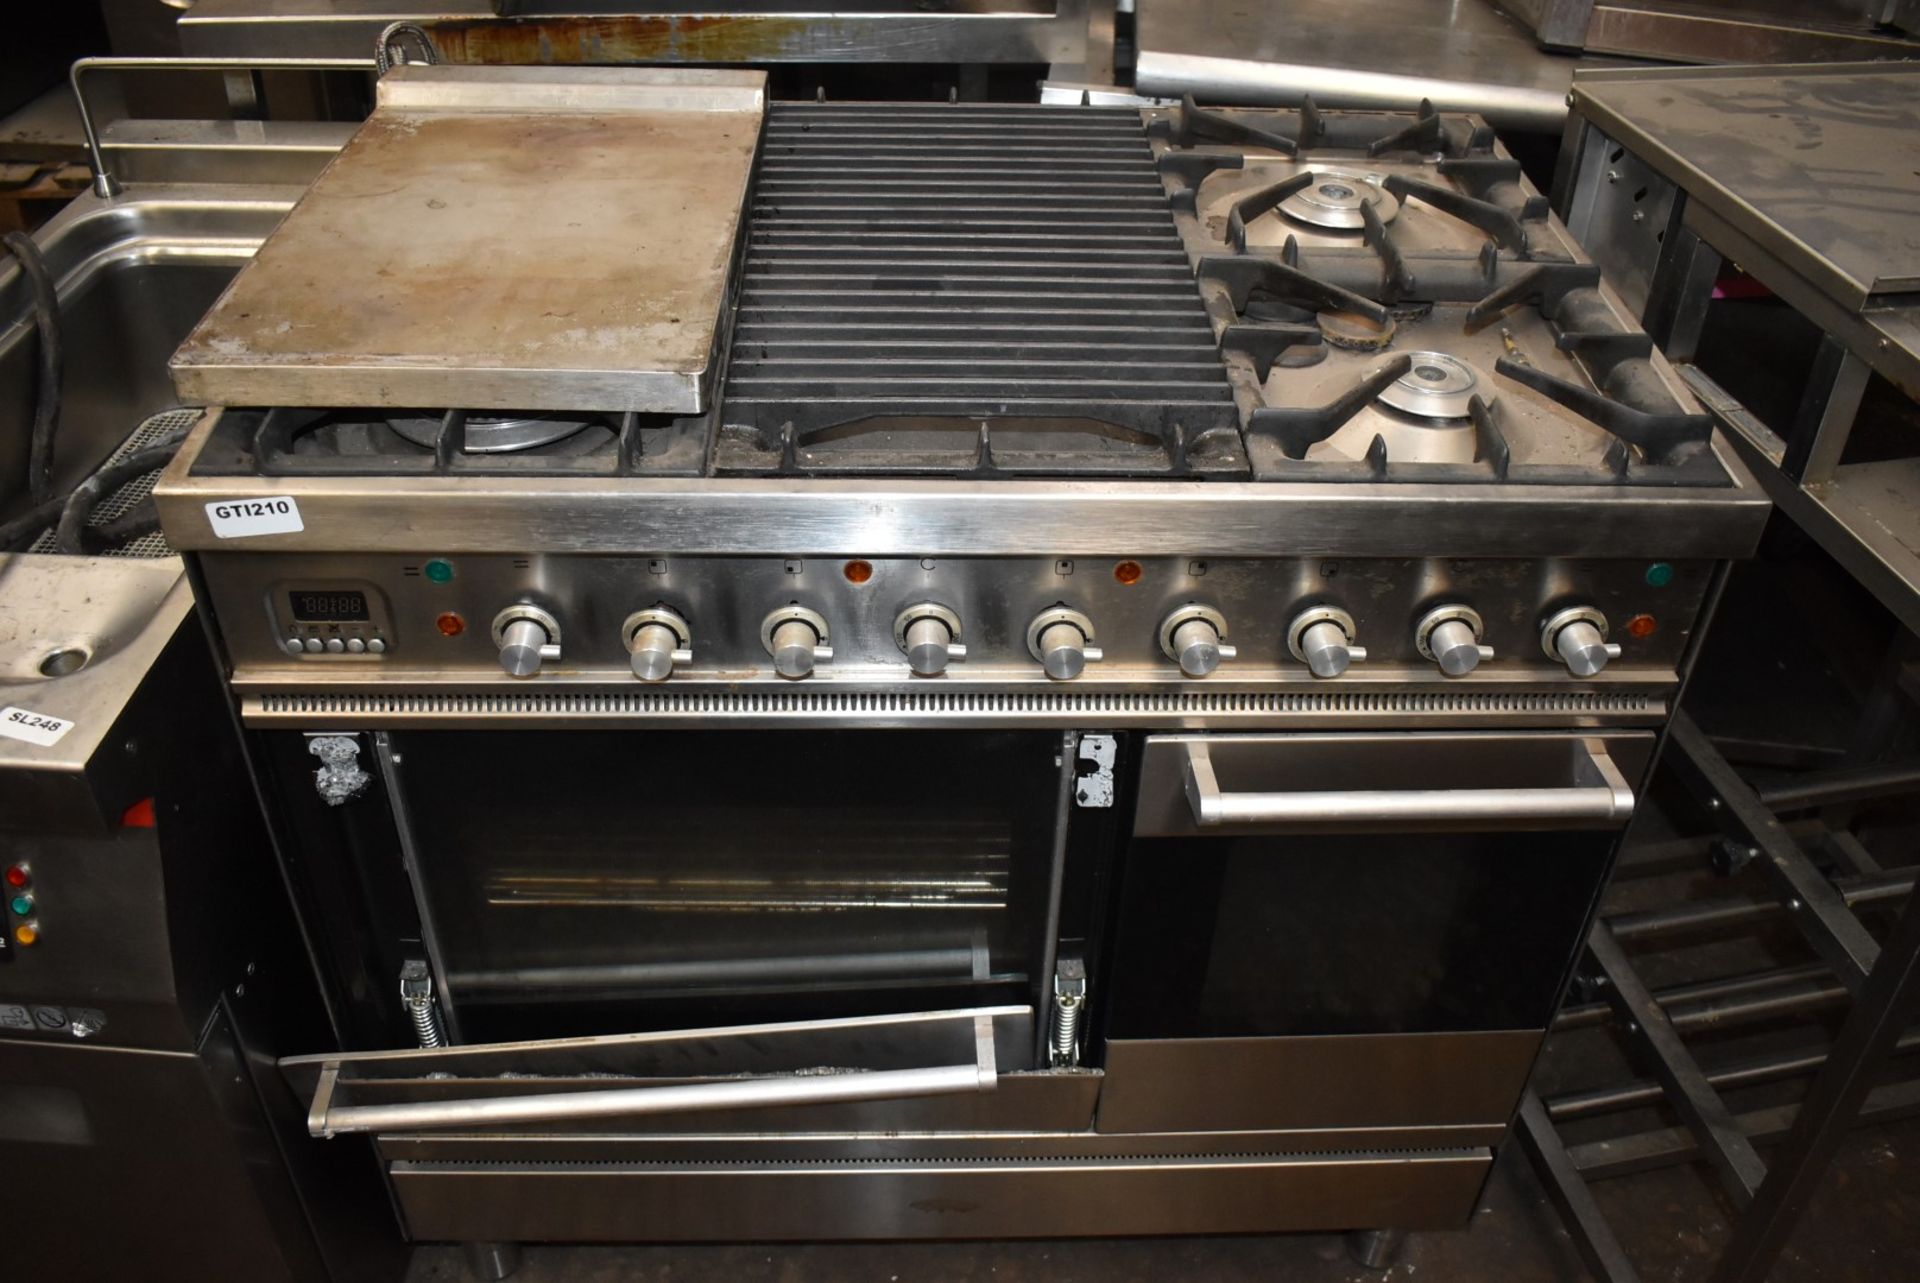 1 x Britainia 90cm Gas Range Cooker With Stainless Steel Finish and Accessories - Requires Attention - Image 2 of 10